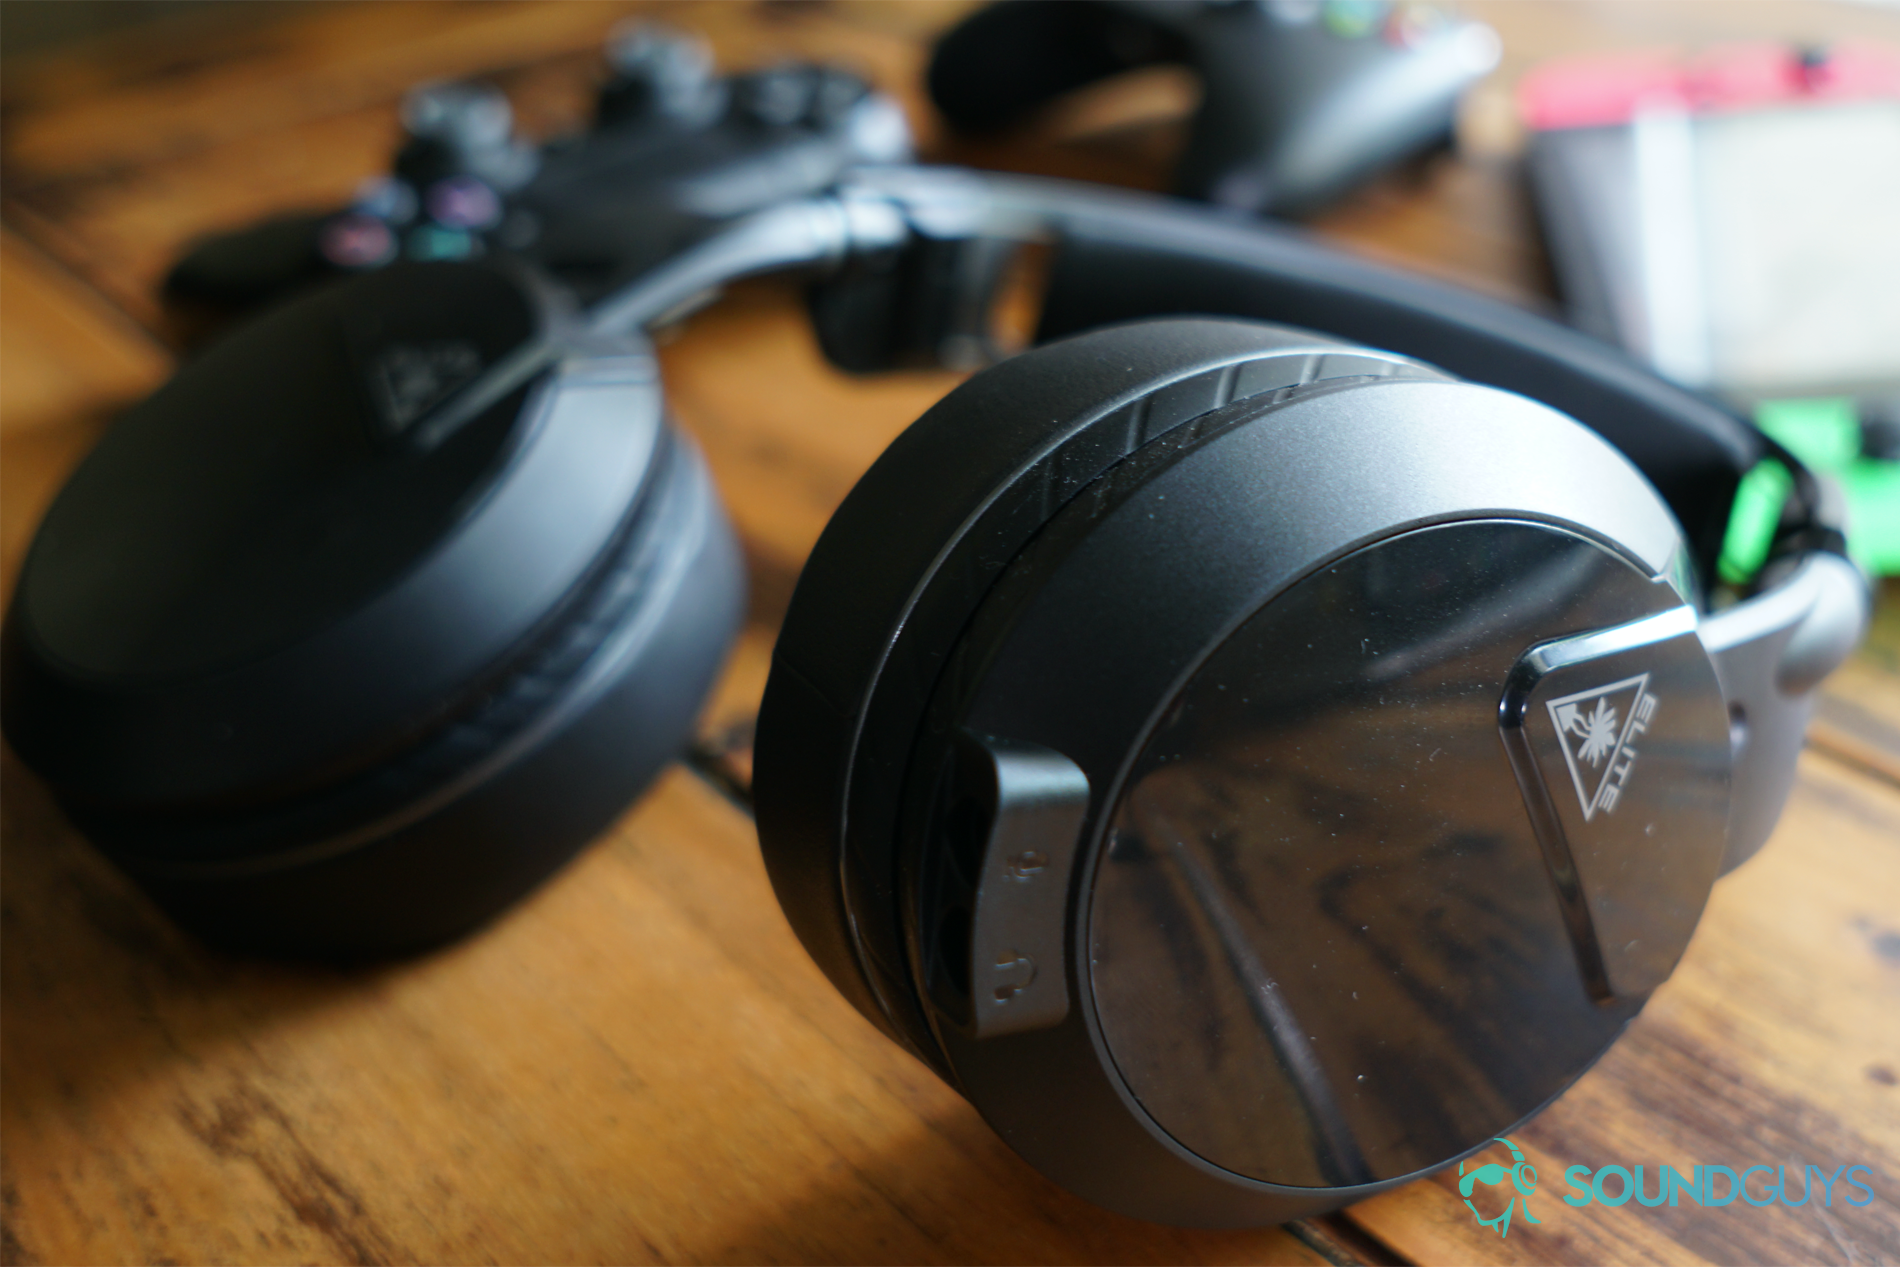 The Turtle Beach Elite Atlas gaming headset lays on a wooden table in front of a Nintendo Switch, Xbox One controller, and Playstation 4 Dualshock controller.